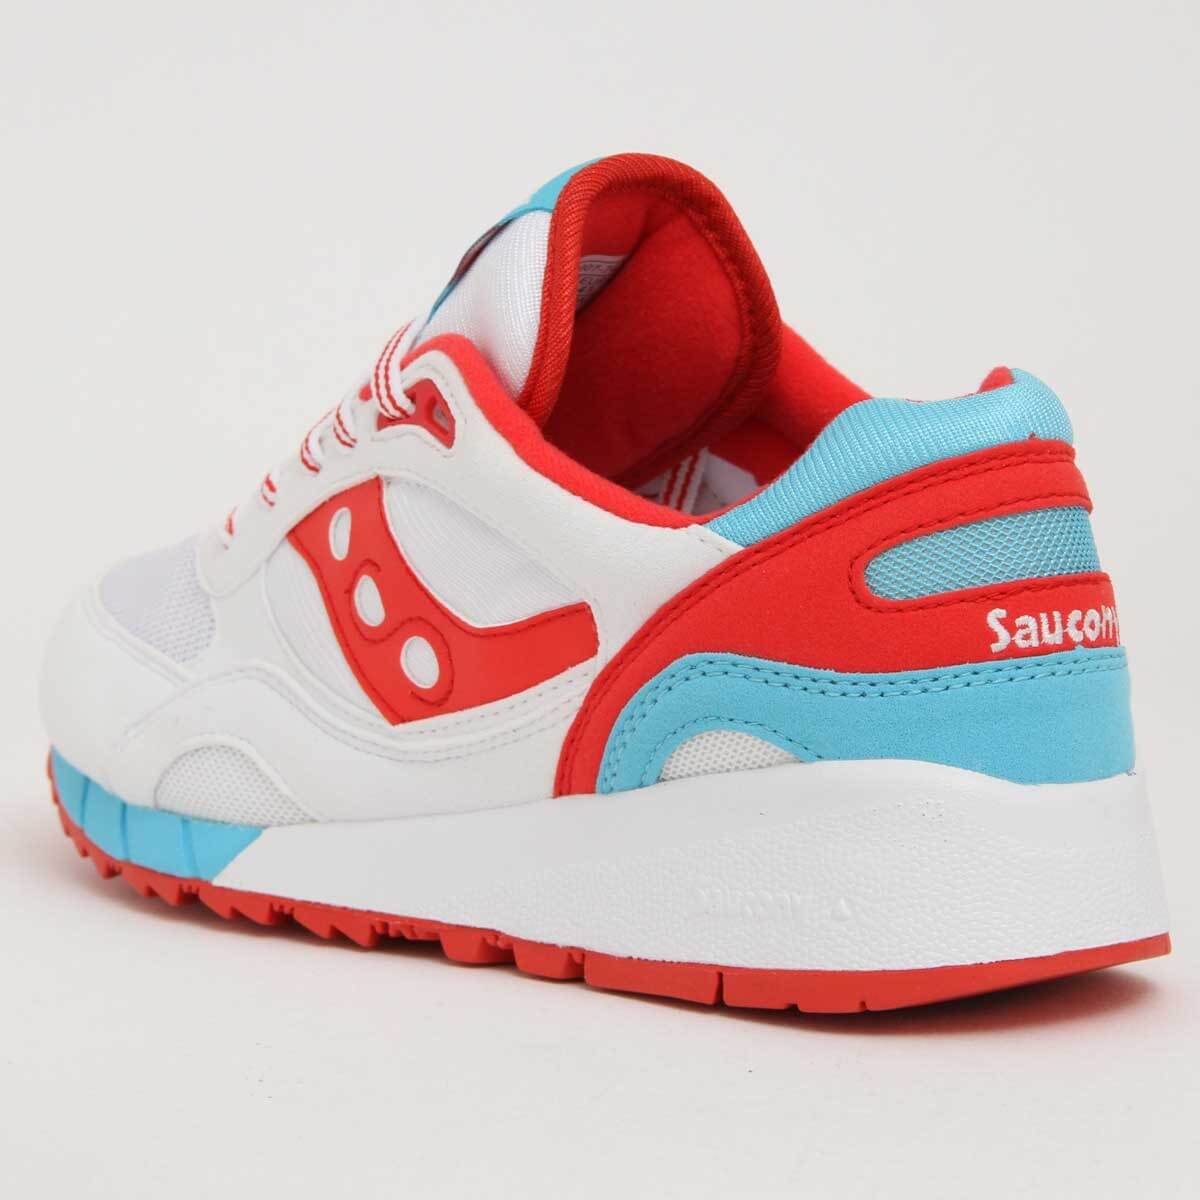 saucony fastwitch 7 mens red